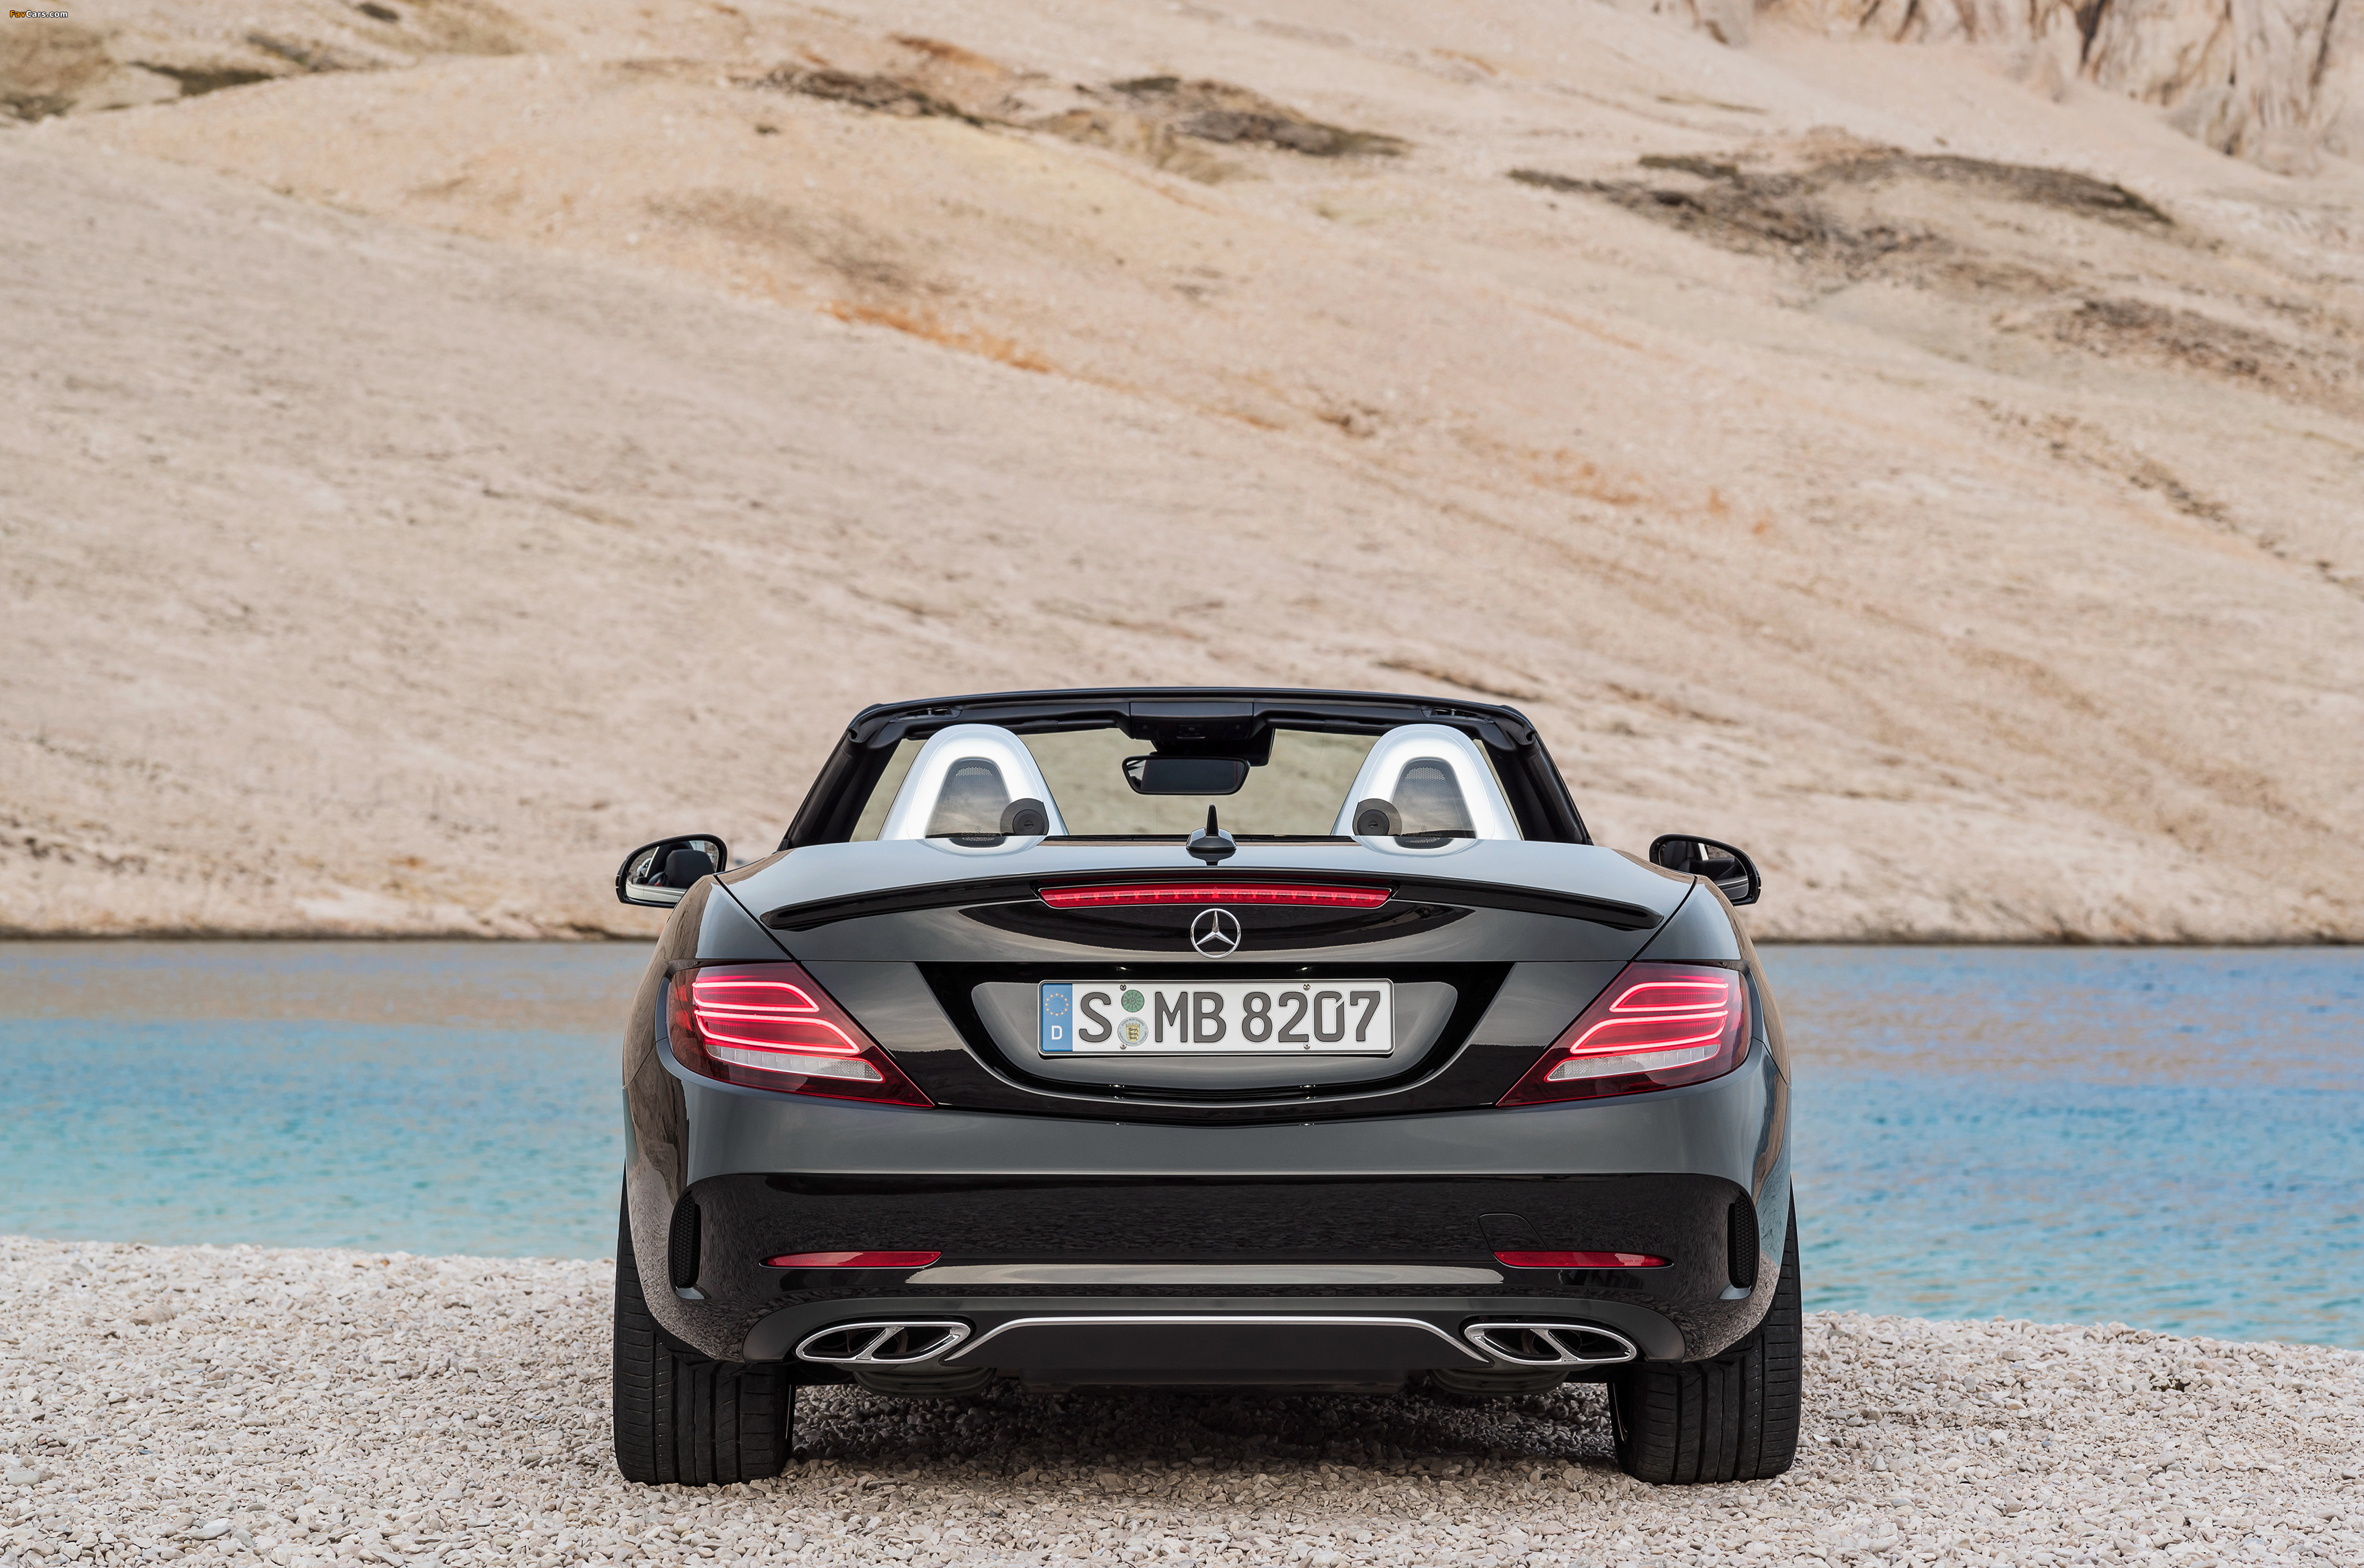 Mercedes-AMG SLC 43 (R172) 2016 wallpapers (4096 x 2717)